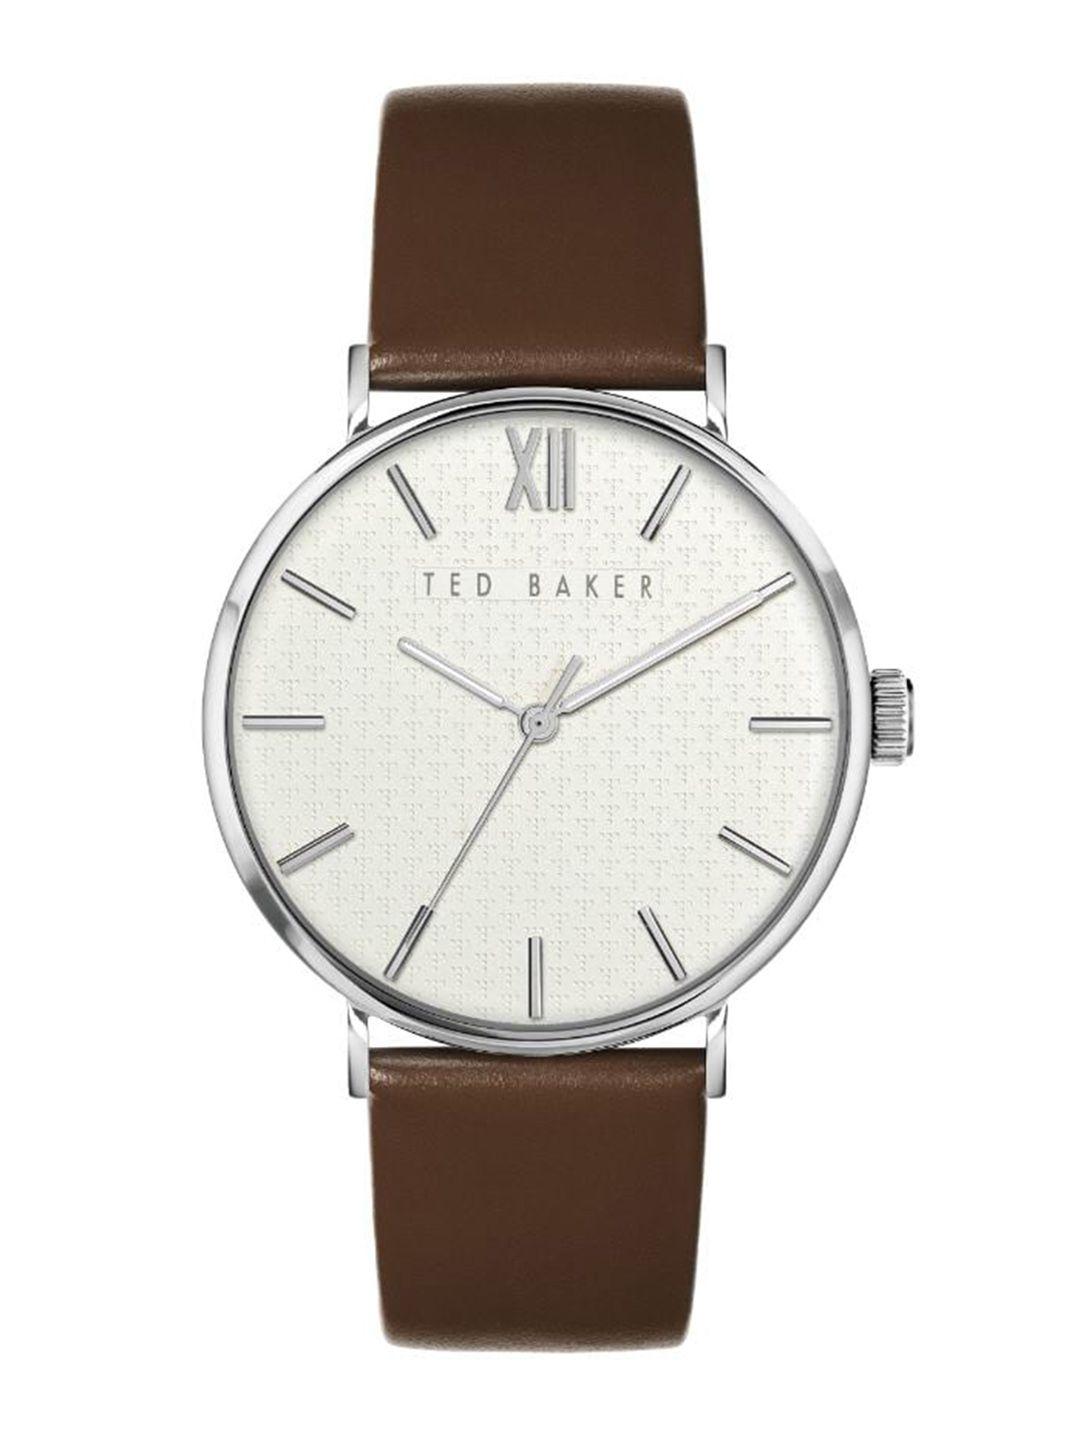 ted-baker-men-mother-of-pearl-dial-leather-straps-analogue-watch-bkppgs215